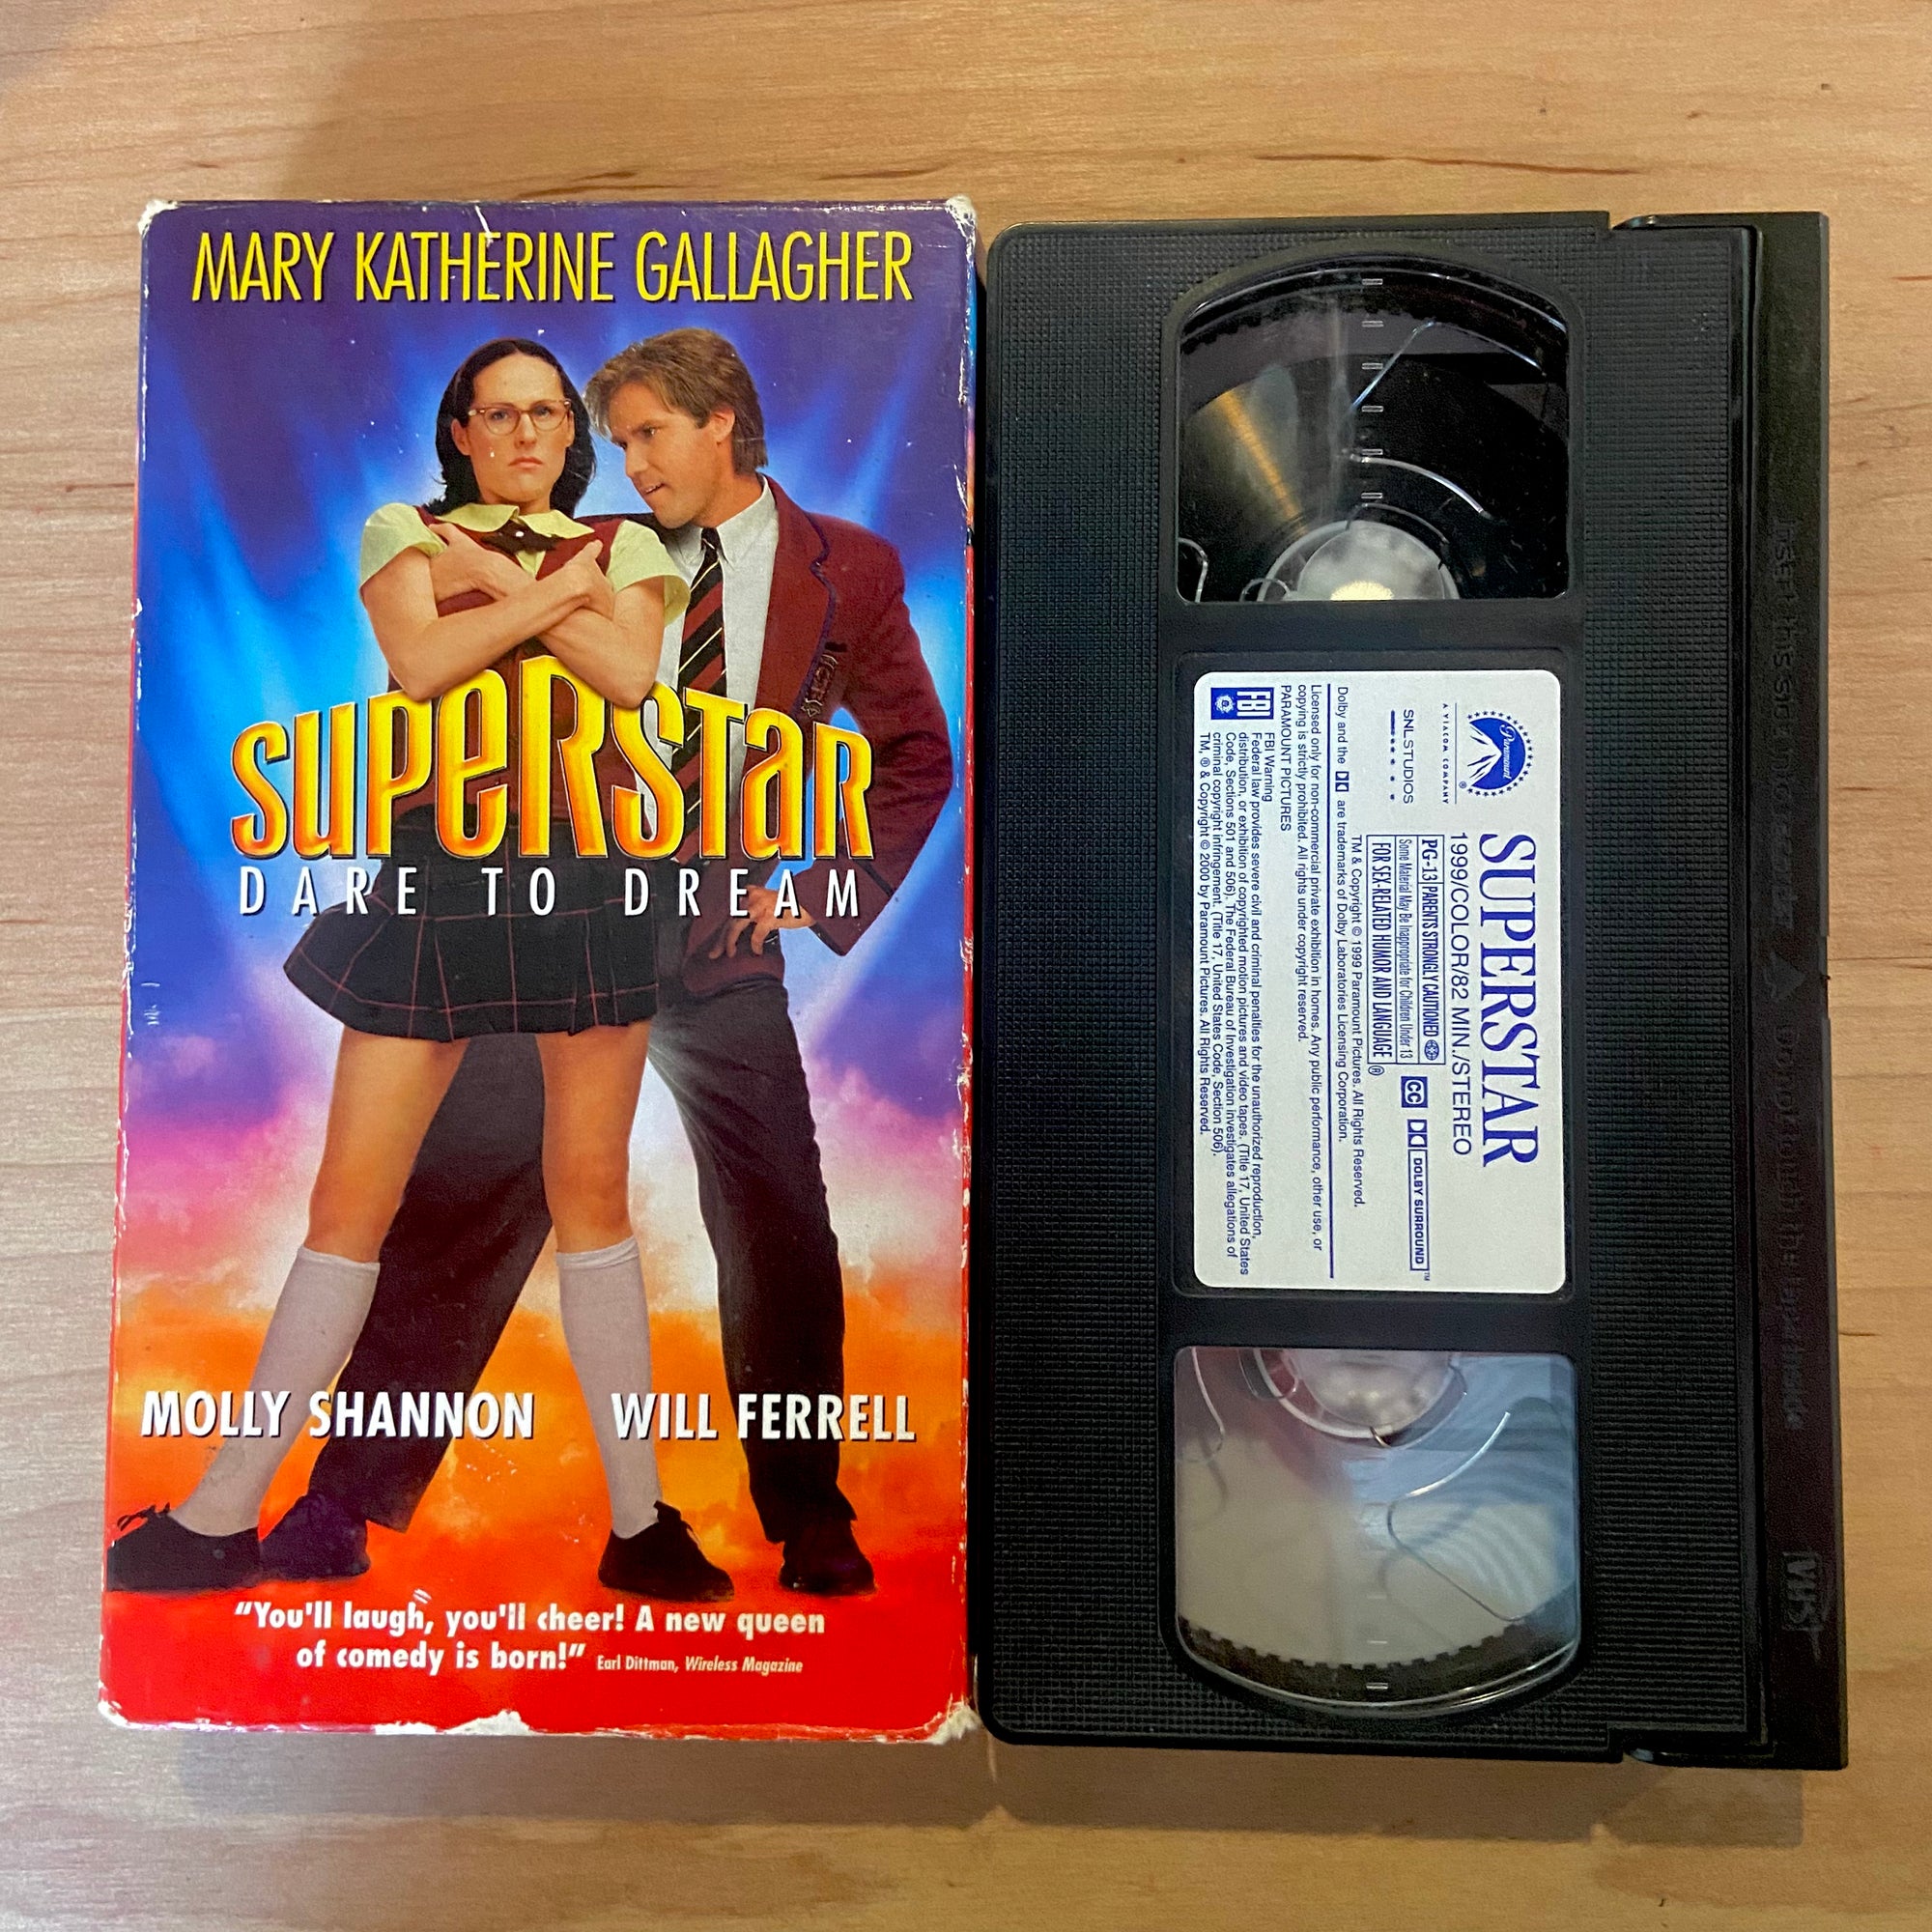 Mary Katherine Gallagher Superstar: Dare to Dream - VHS Tape (Used)